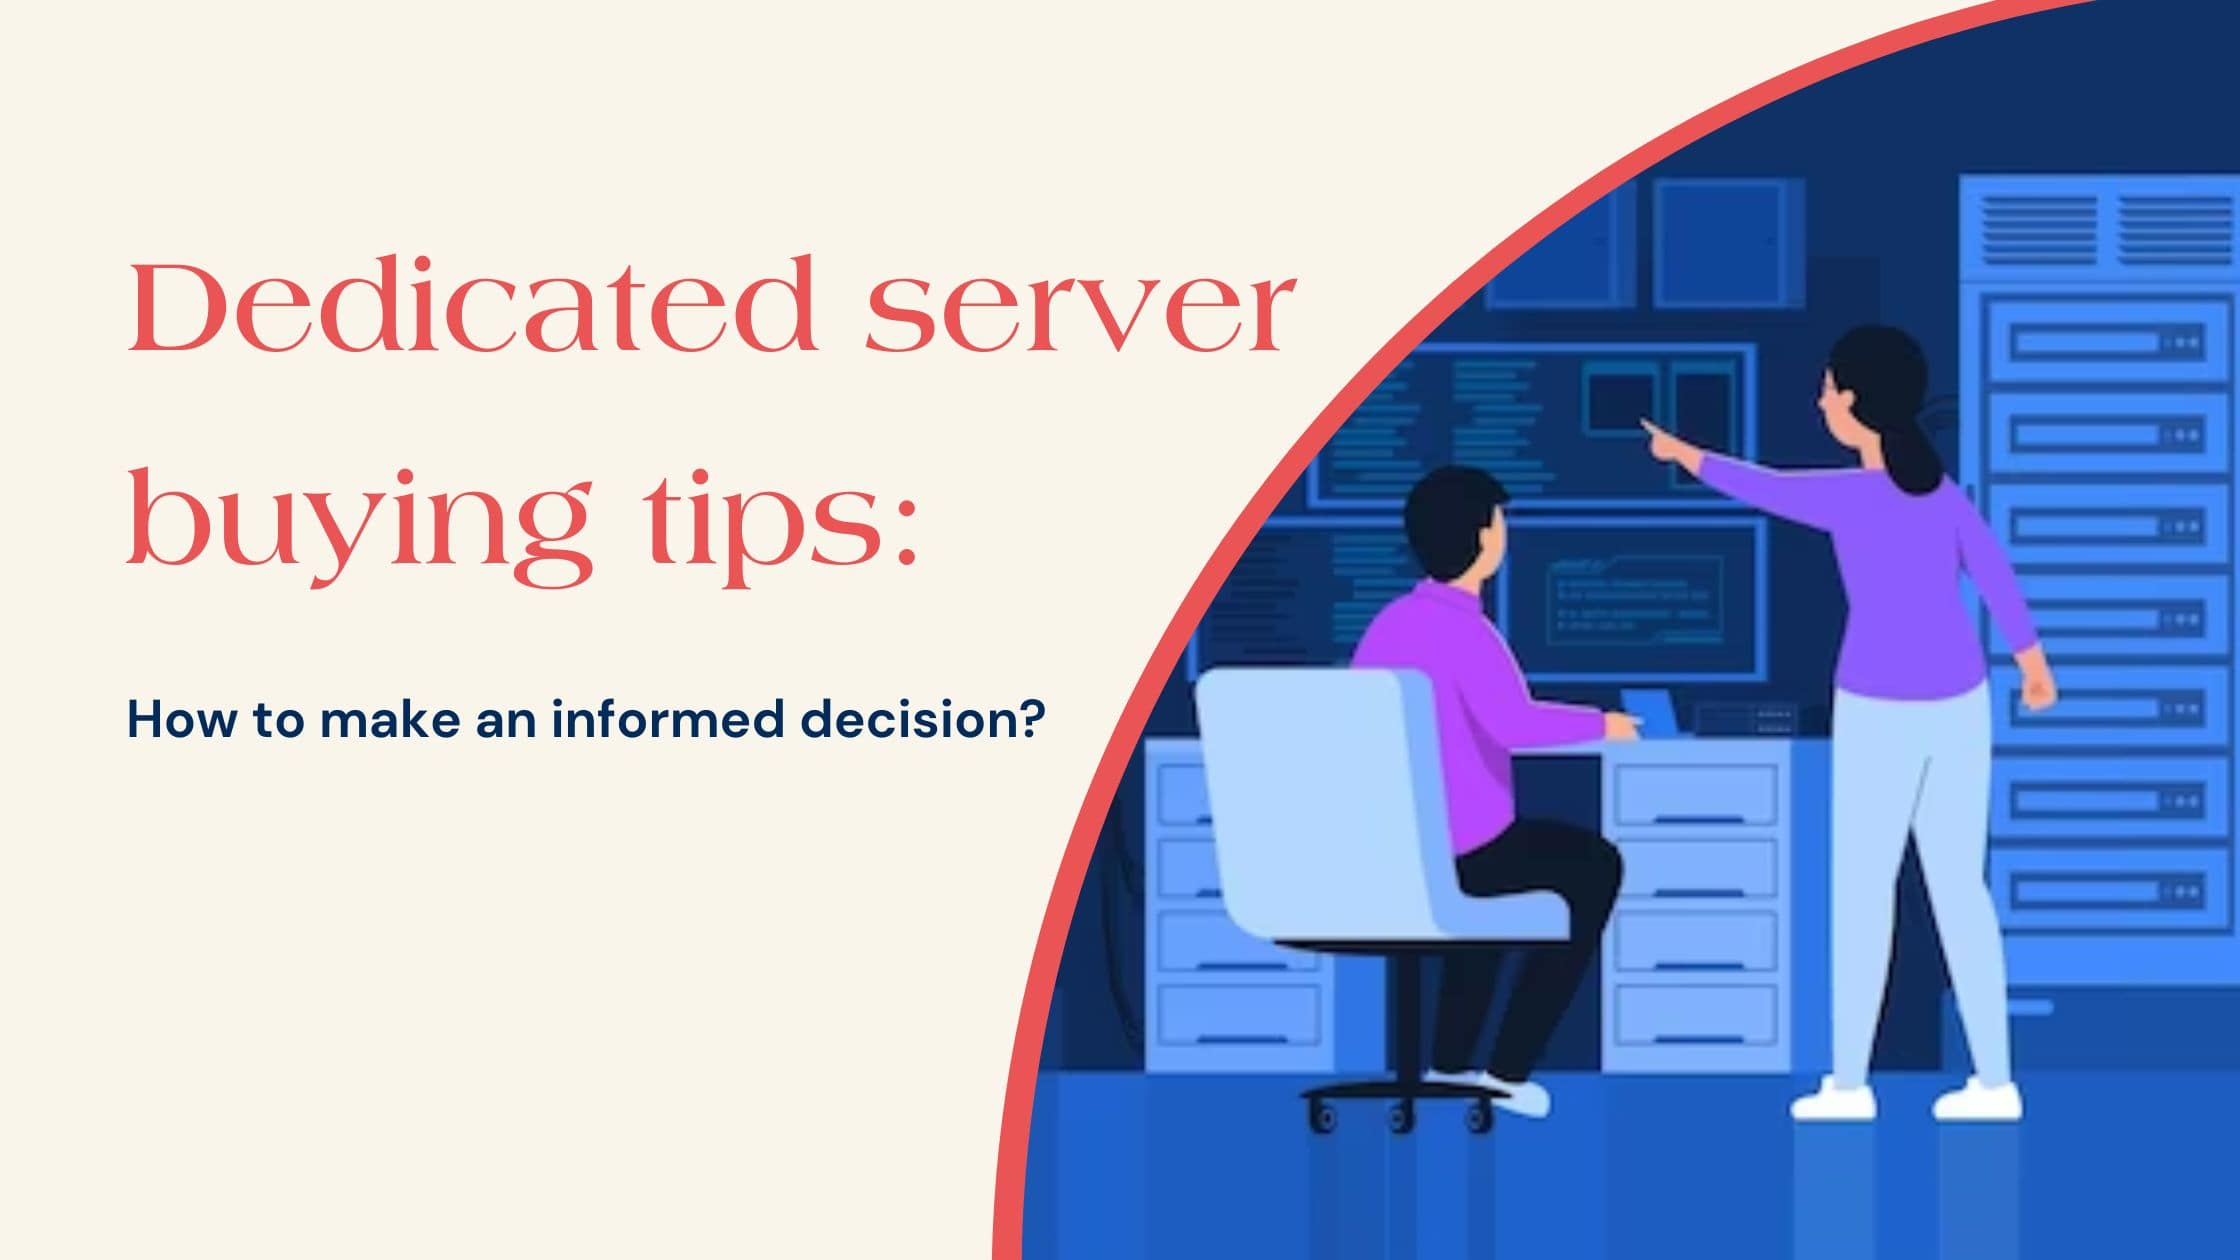 Dedicated server buying tips: How to make an informed decision?